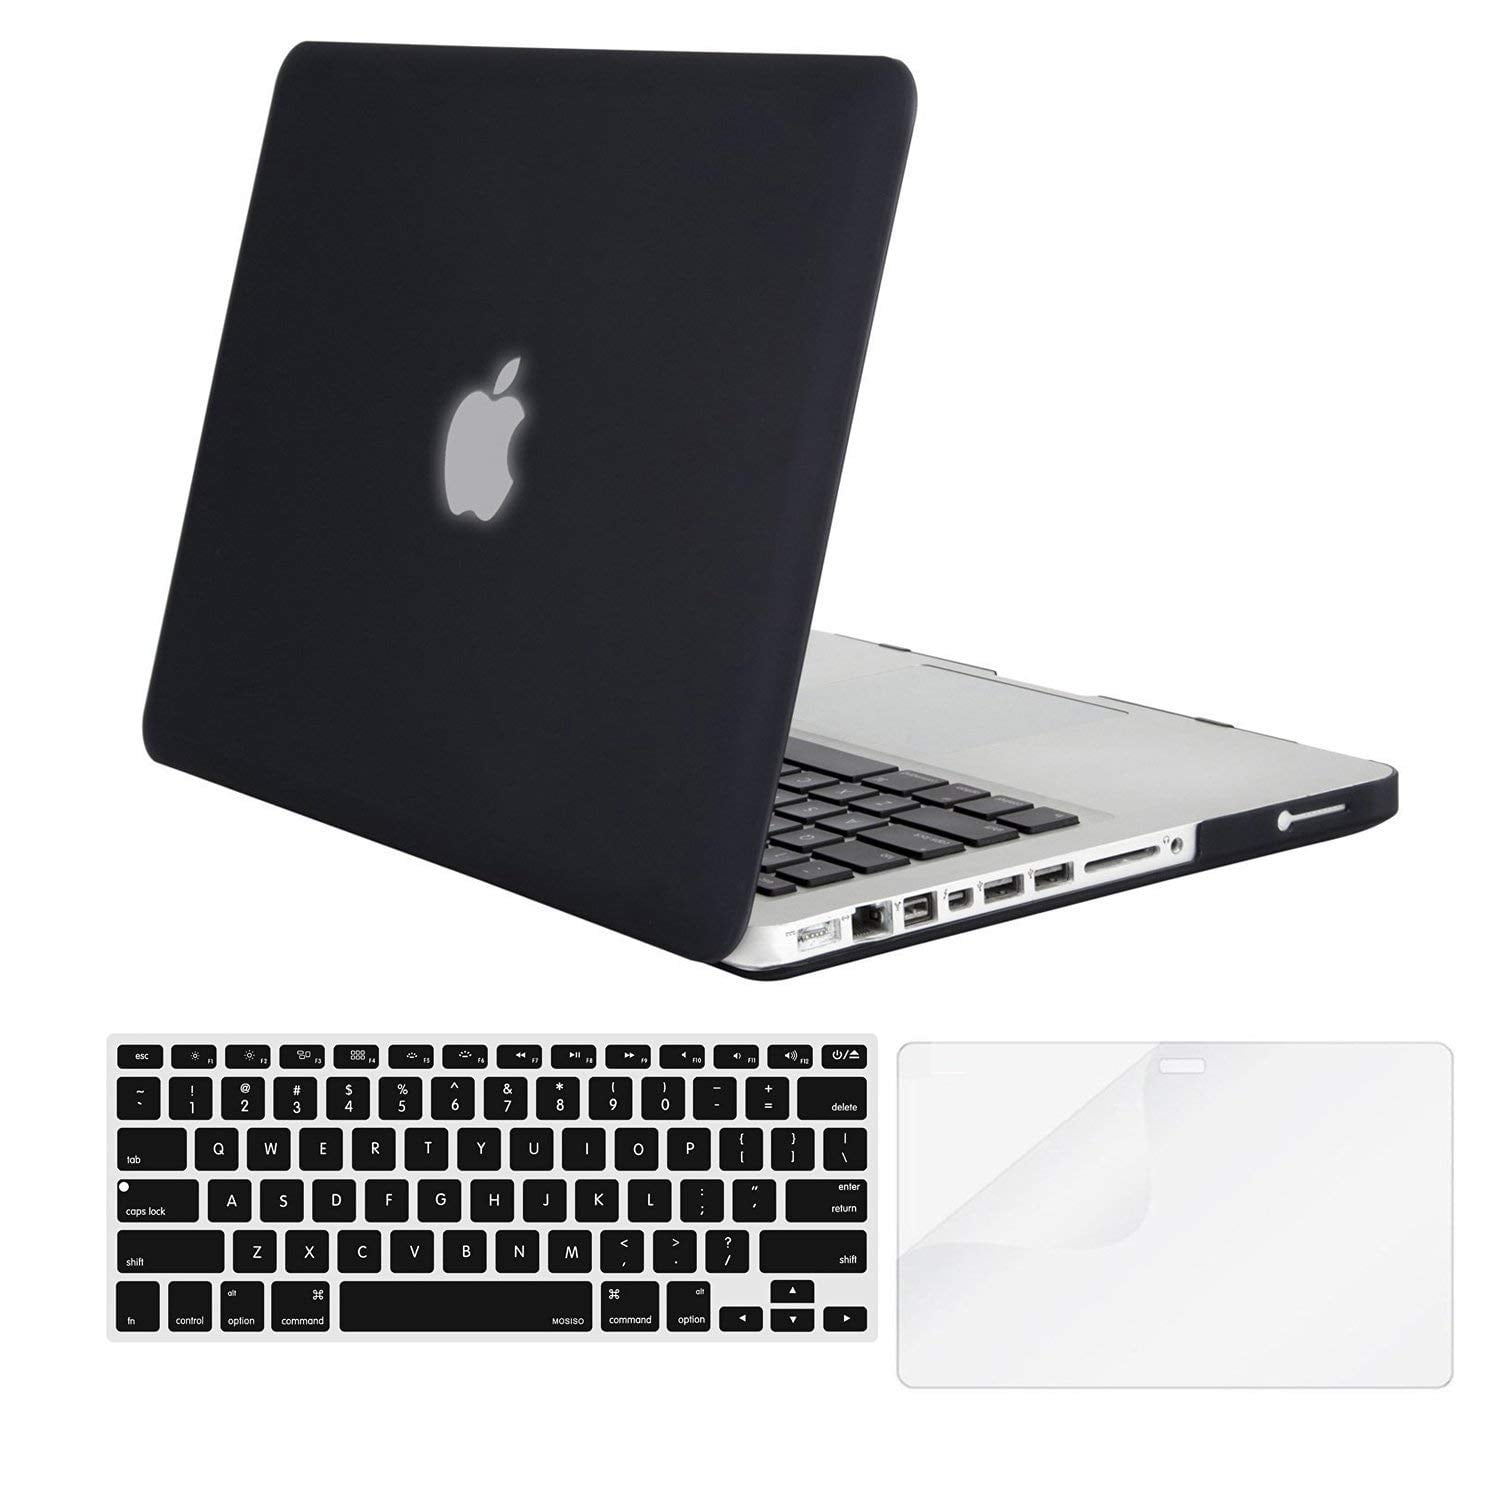 Plastic Case Hard Shell Case for MacBook Pro 13-inch Model A1278 with Keyboard Skin Cover and Screen Protector MacBook Case,Laptop Case Color 9 